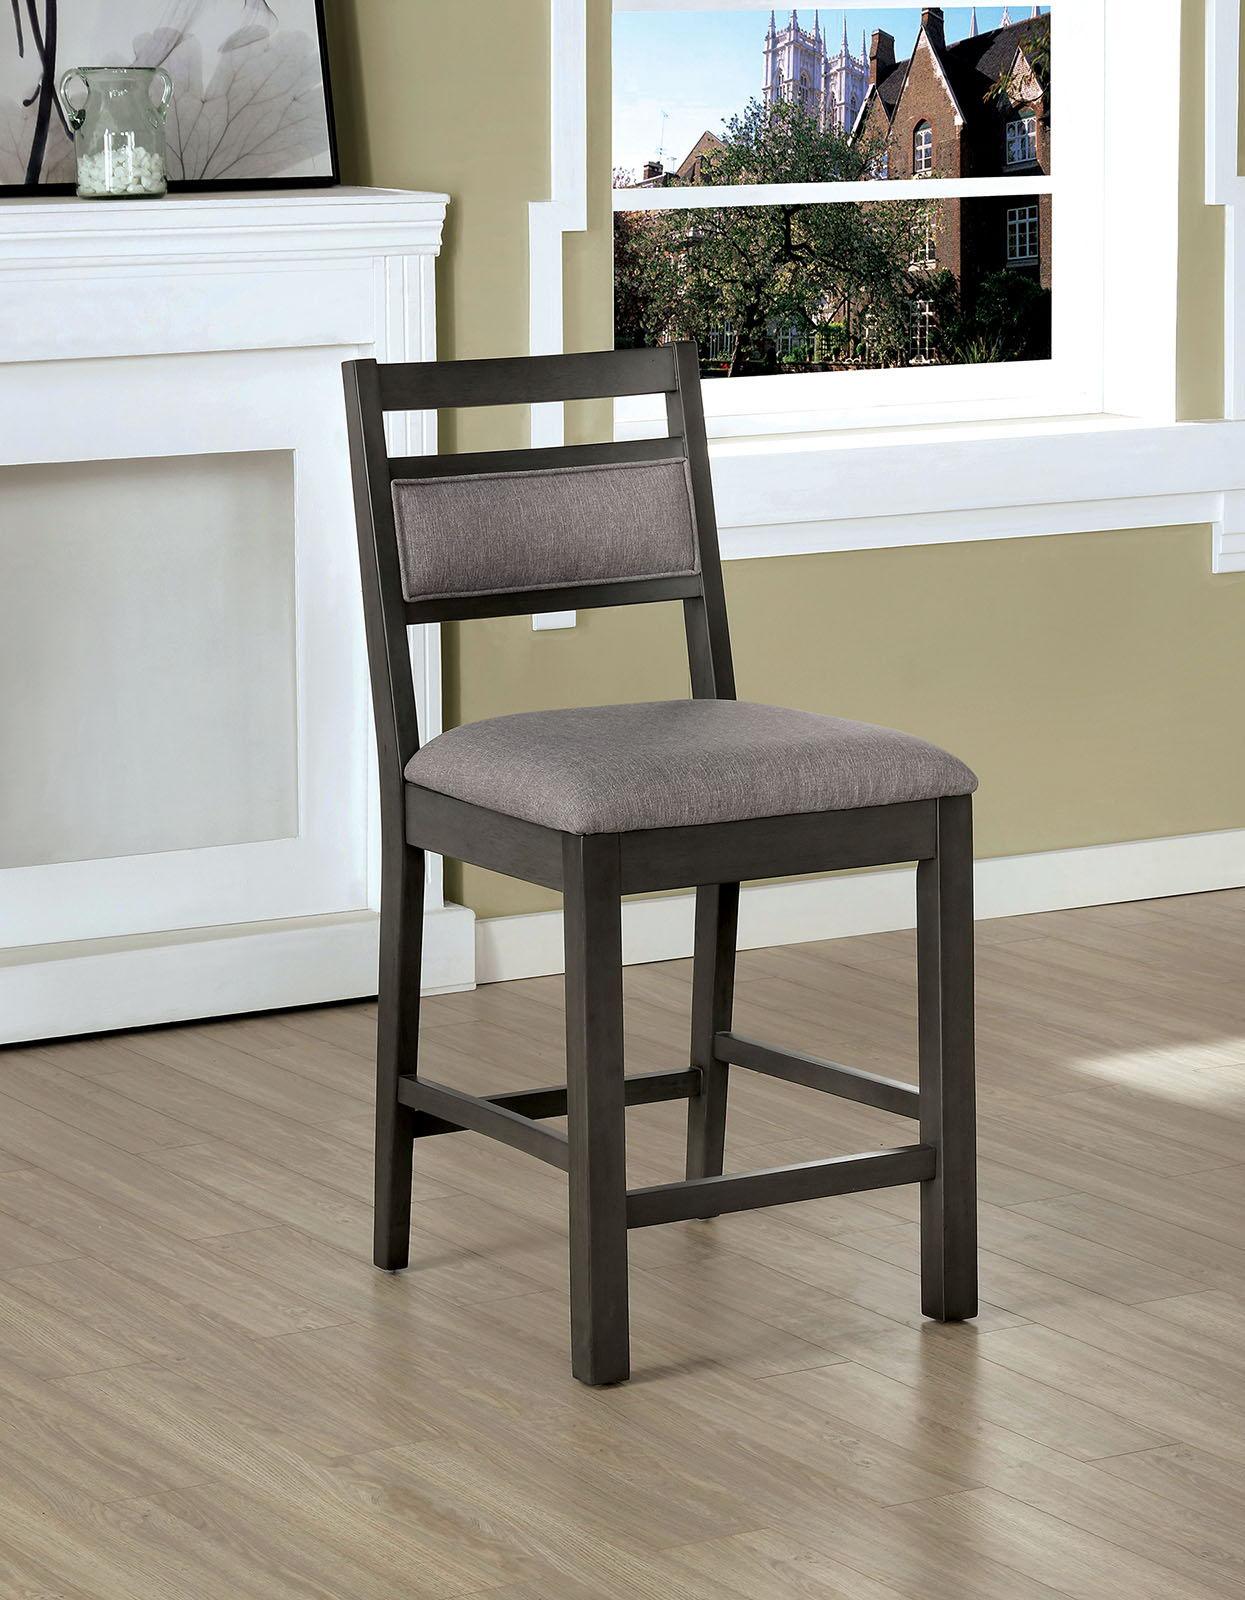 Furniture of America - Vicky - Counter Height Chair(Set of 2) - Gray - 5th Avenue Furniture